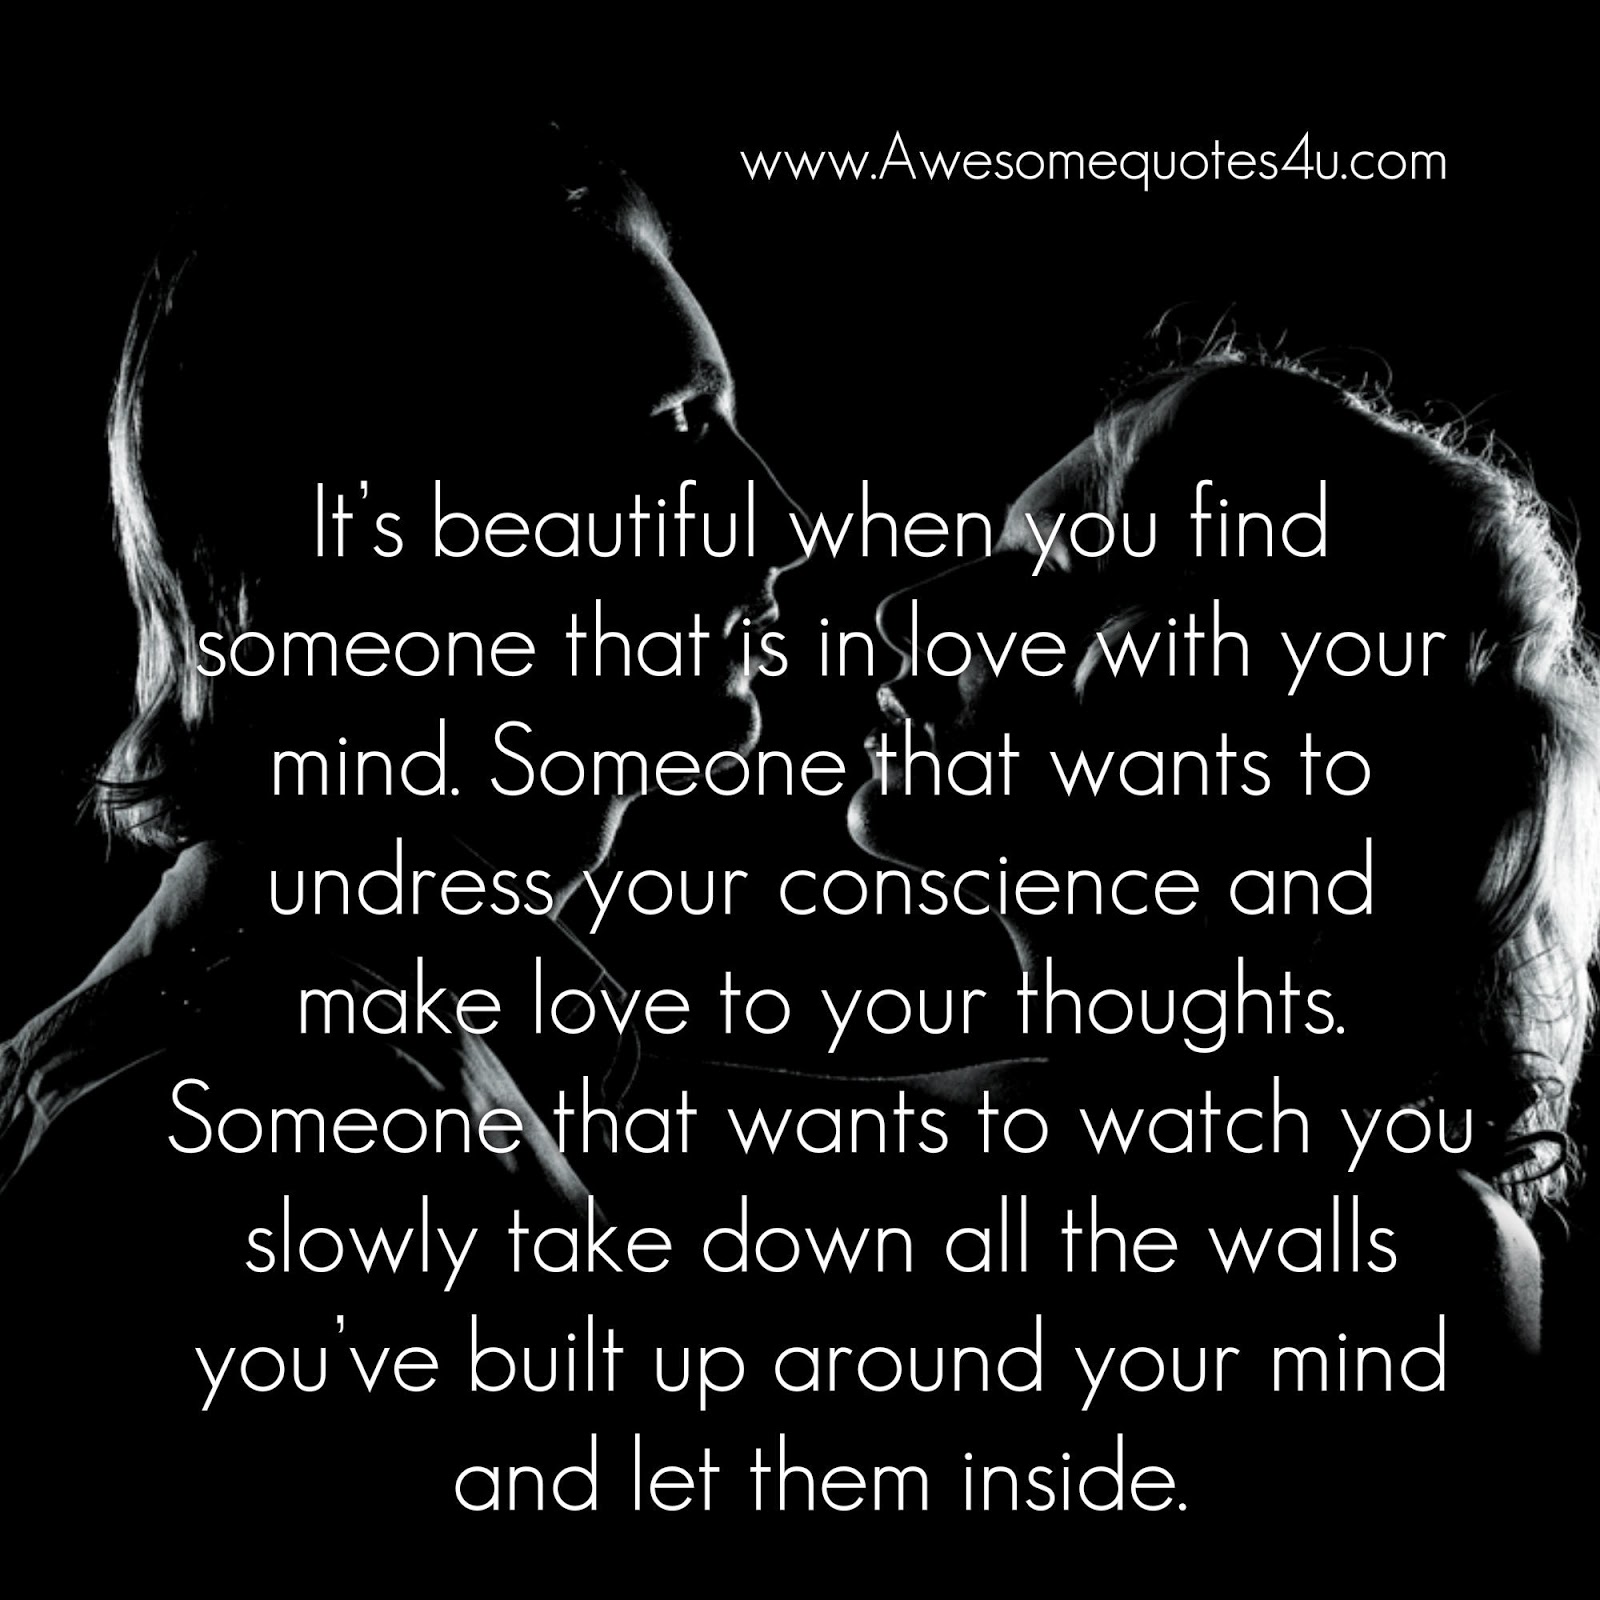 Awesome Quotes  When You Find  Your  Soulmate 